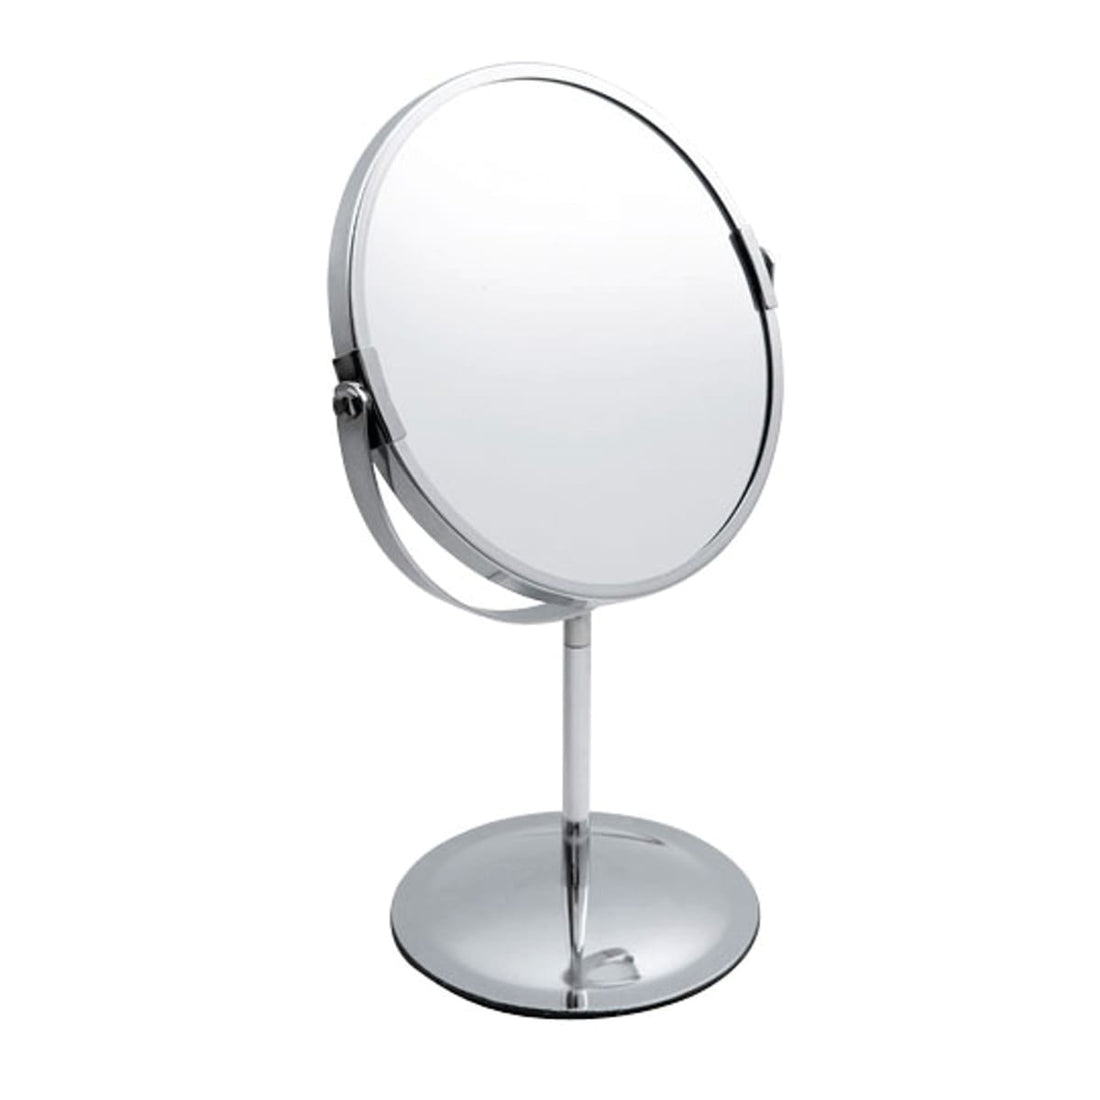 STANDING MAGNIFYING MIRROR